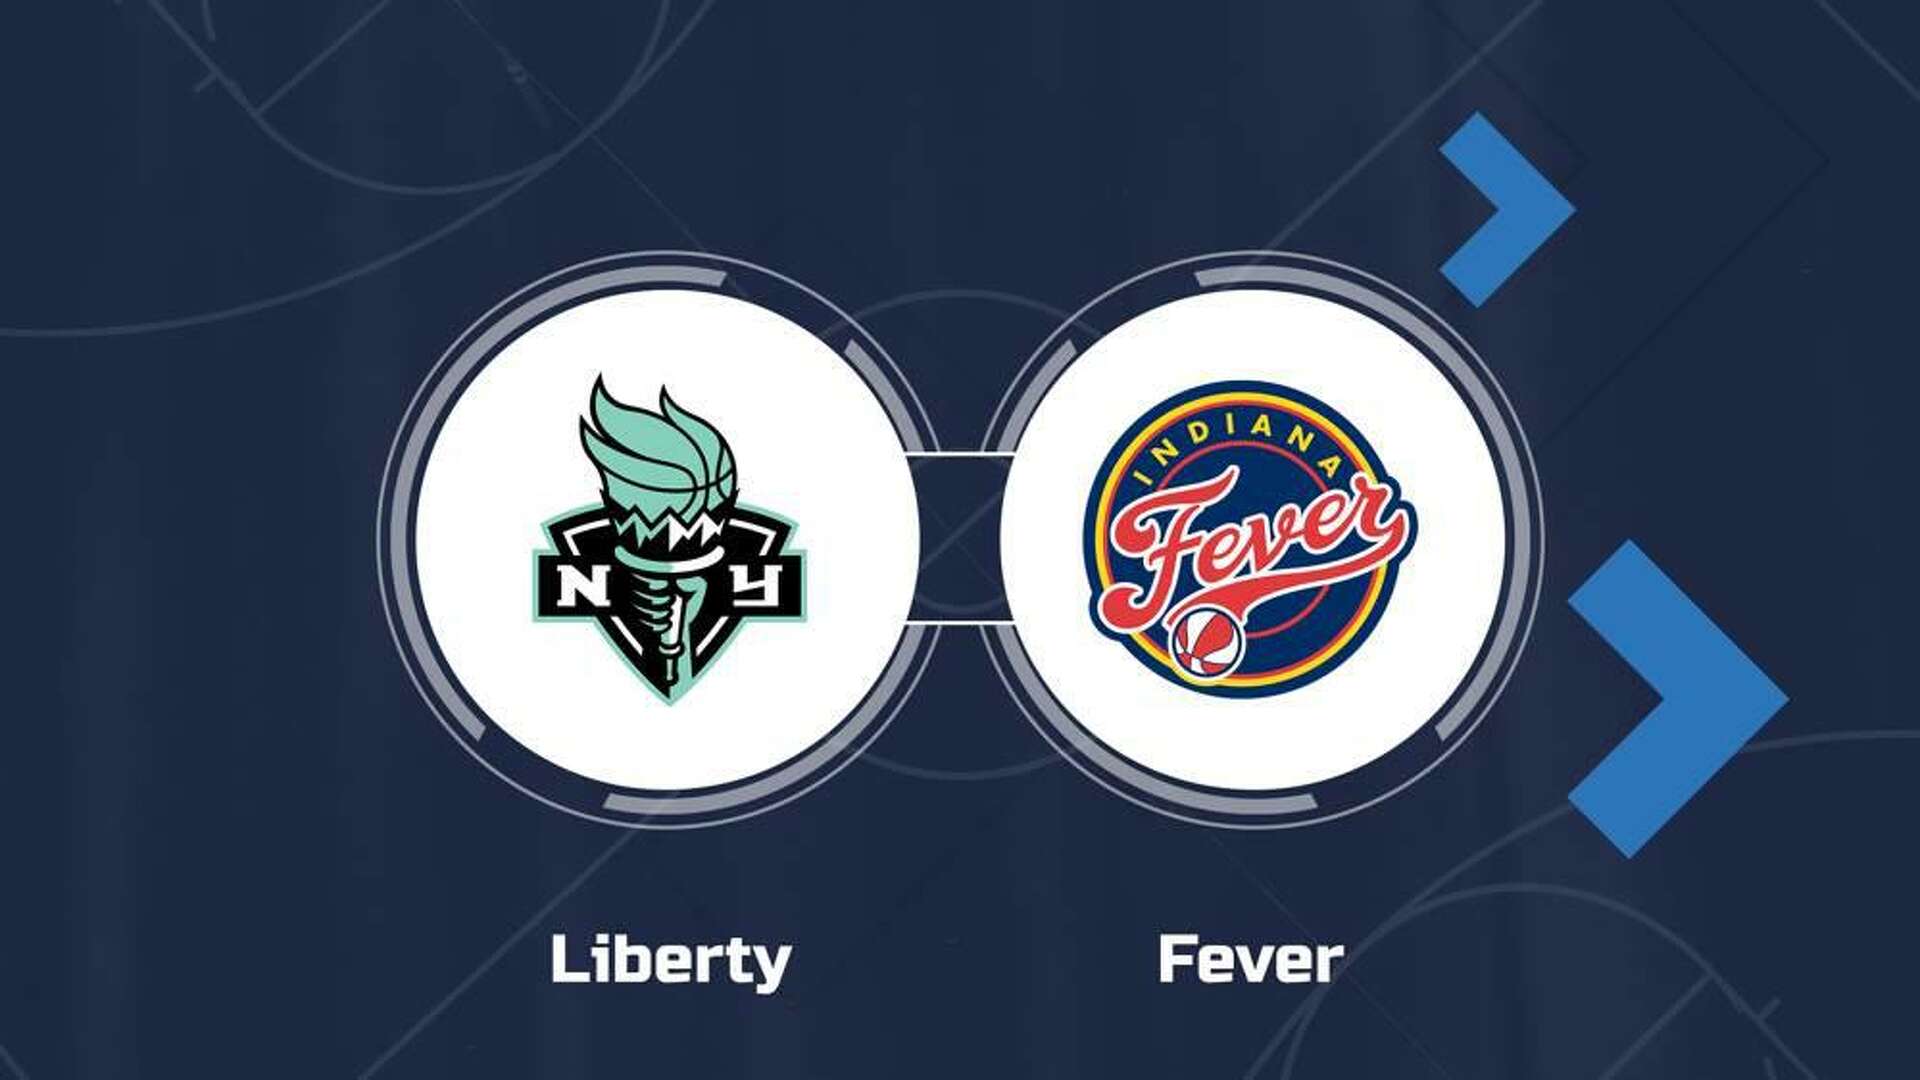 Buy tickets for Liberty vs. Fever on June 2